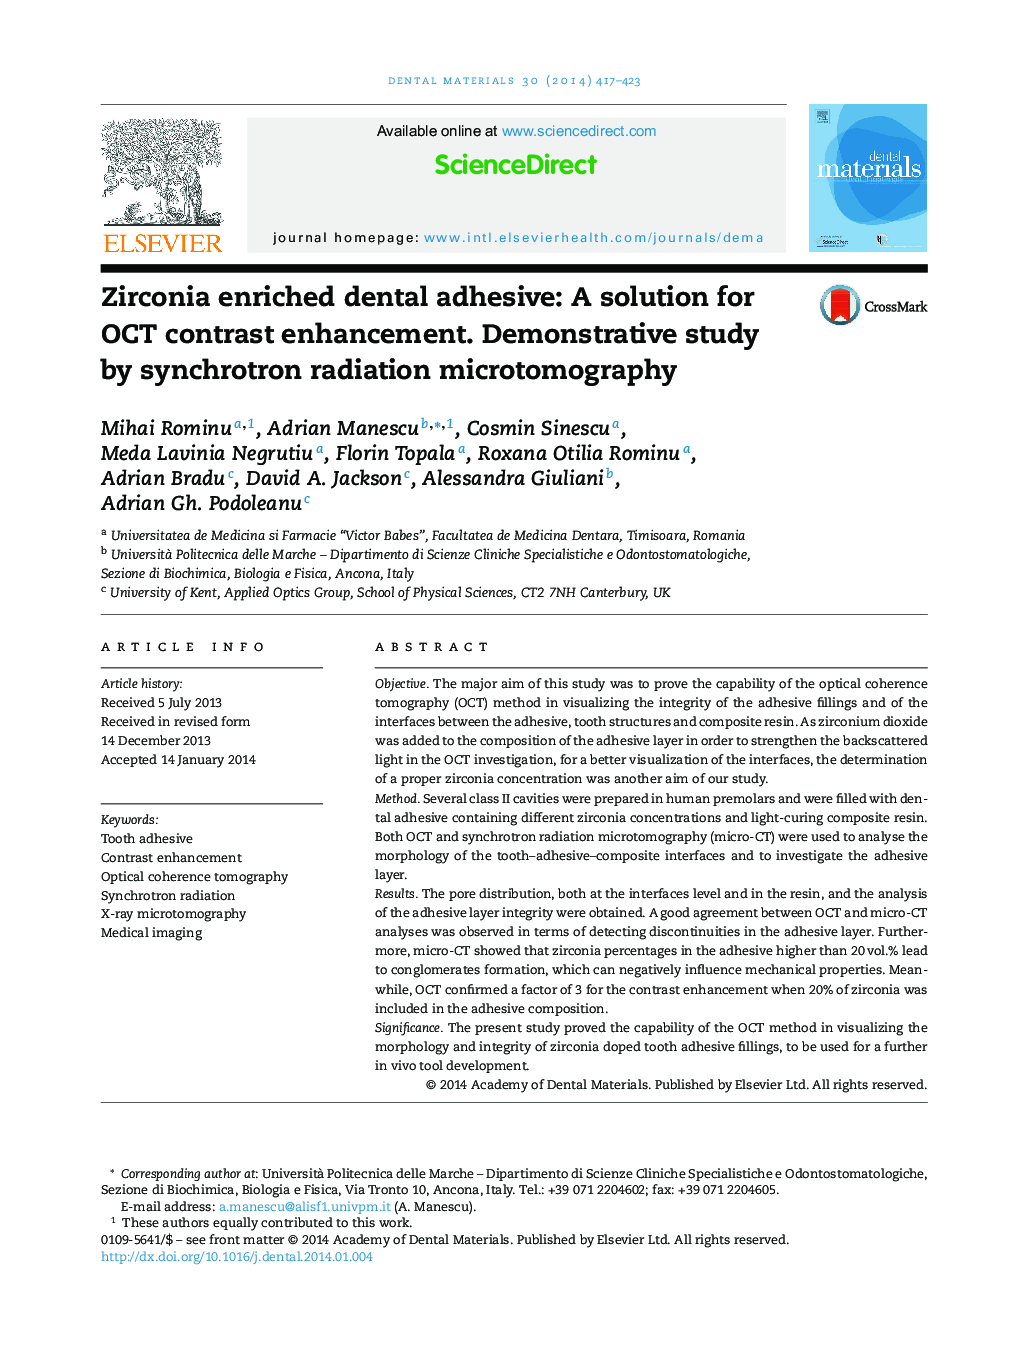 Zirconia enriched dental adhesive: A solution for OCT contrast enhancement. Demonstrative study by synchrotron radiation microtomography